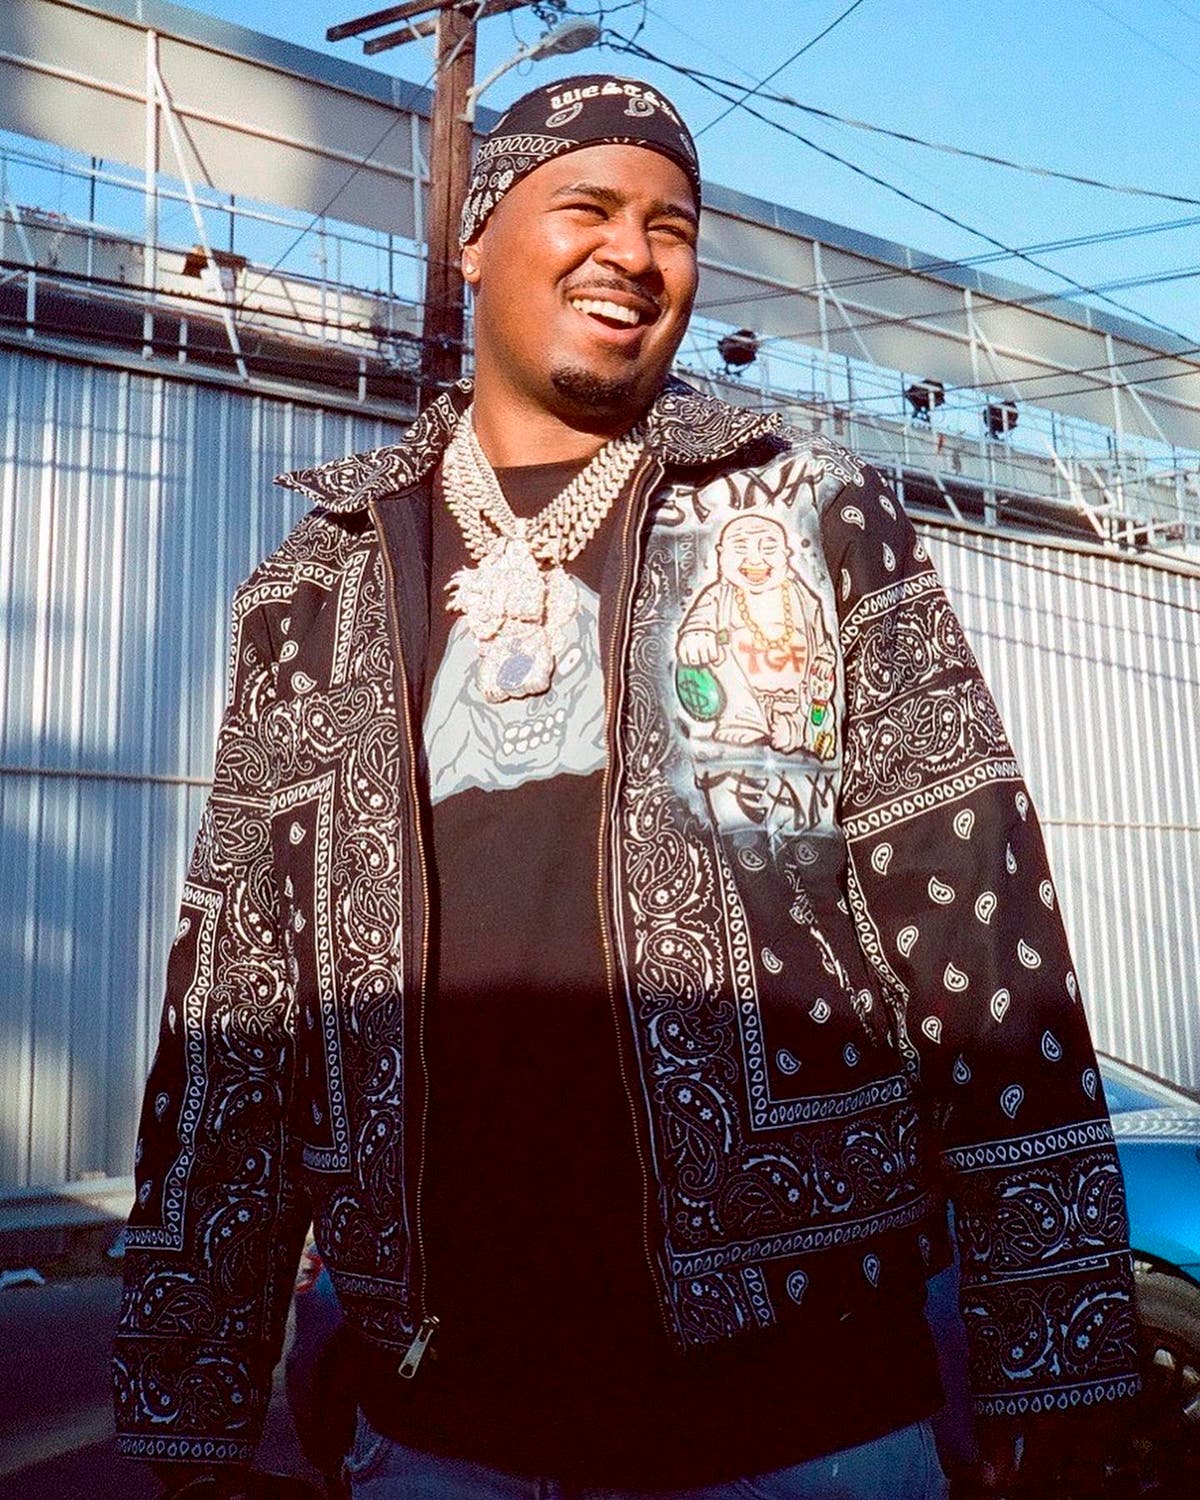 Family says lax security allowed killing of rapper Drakeo